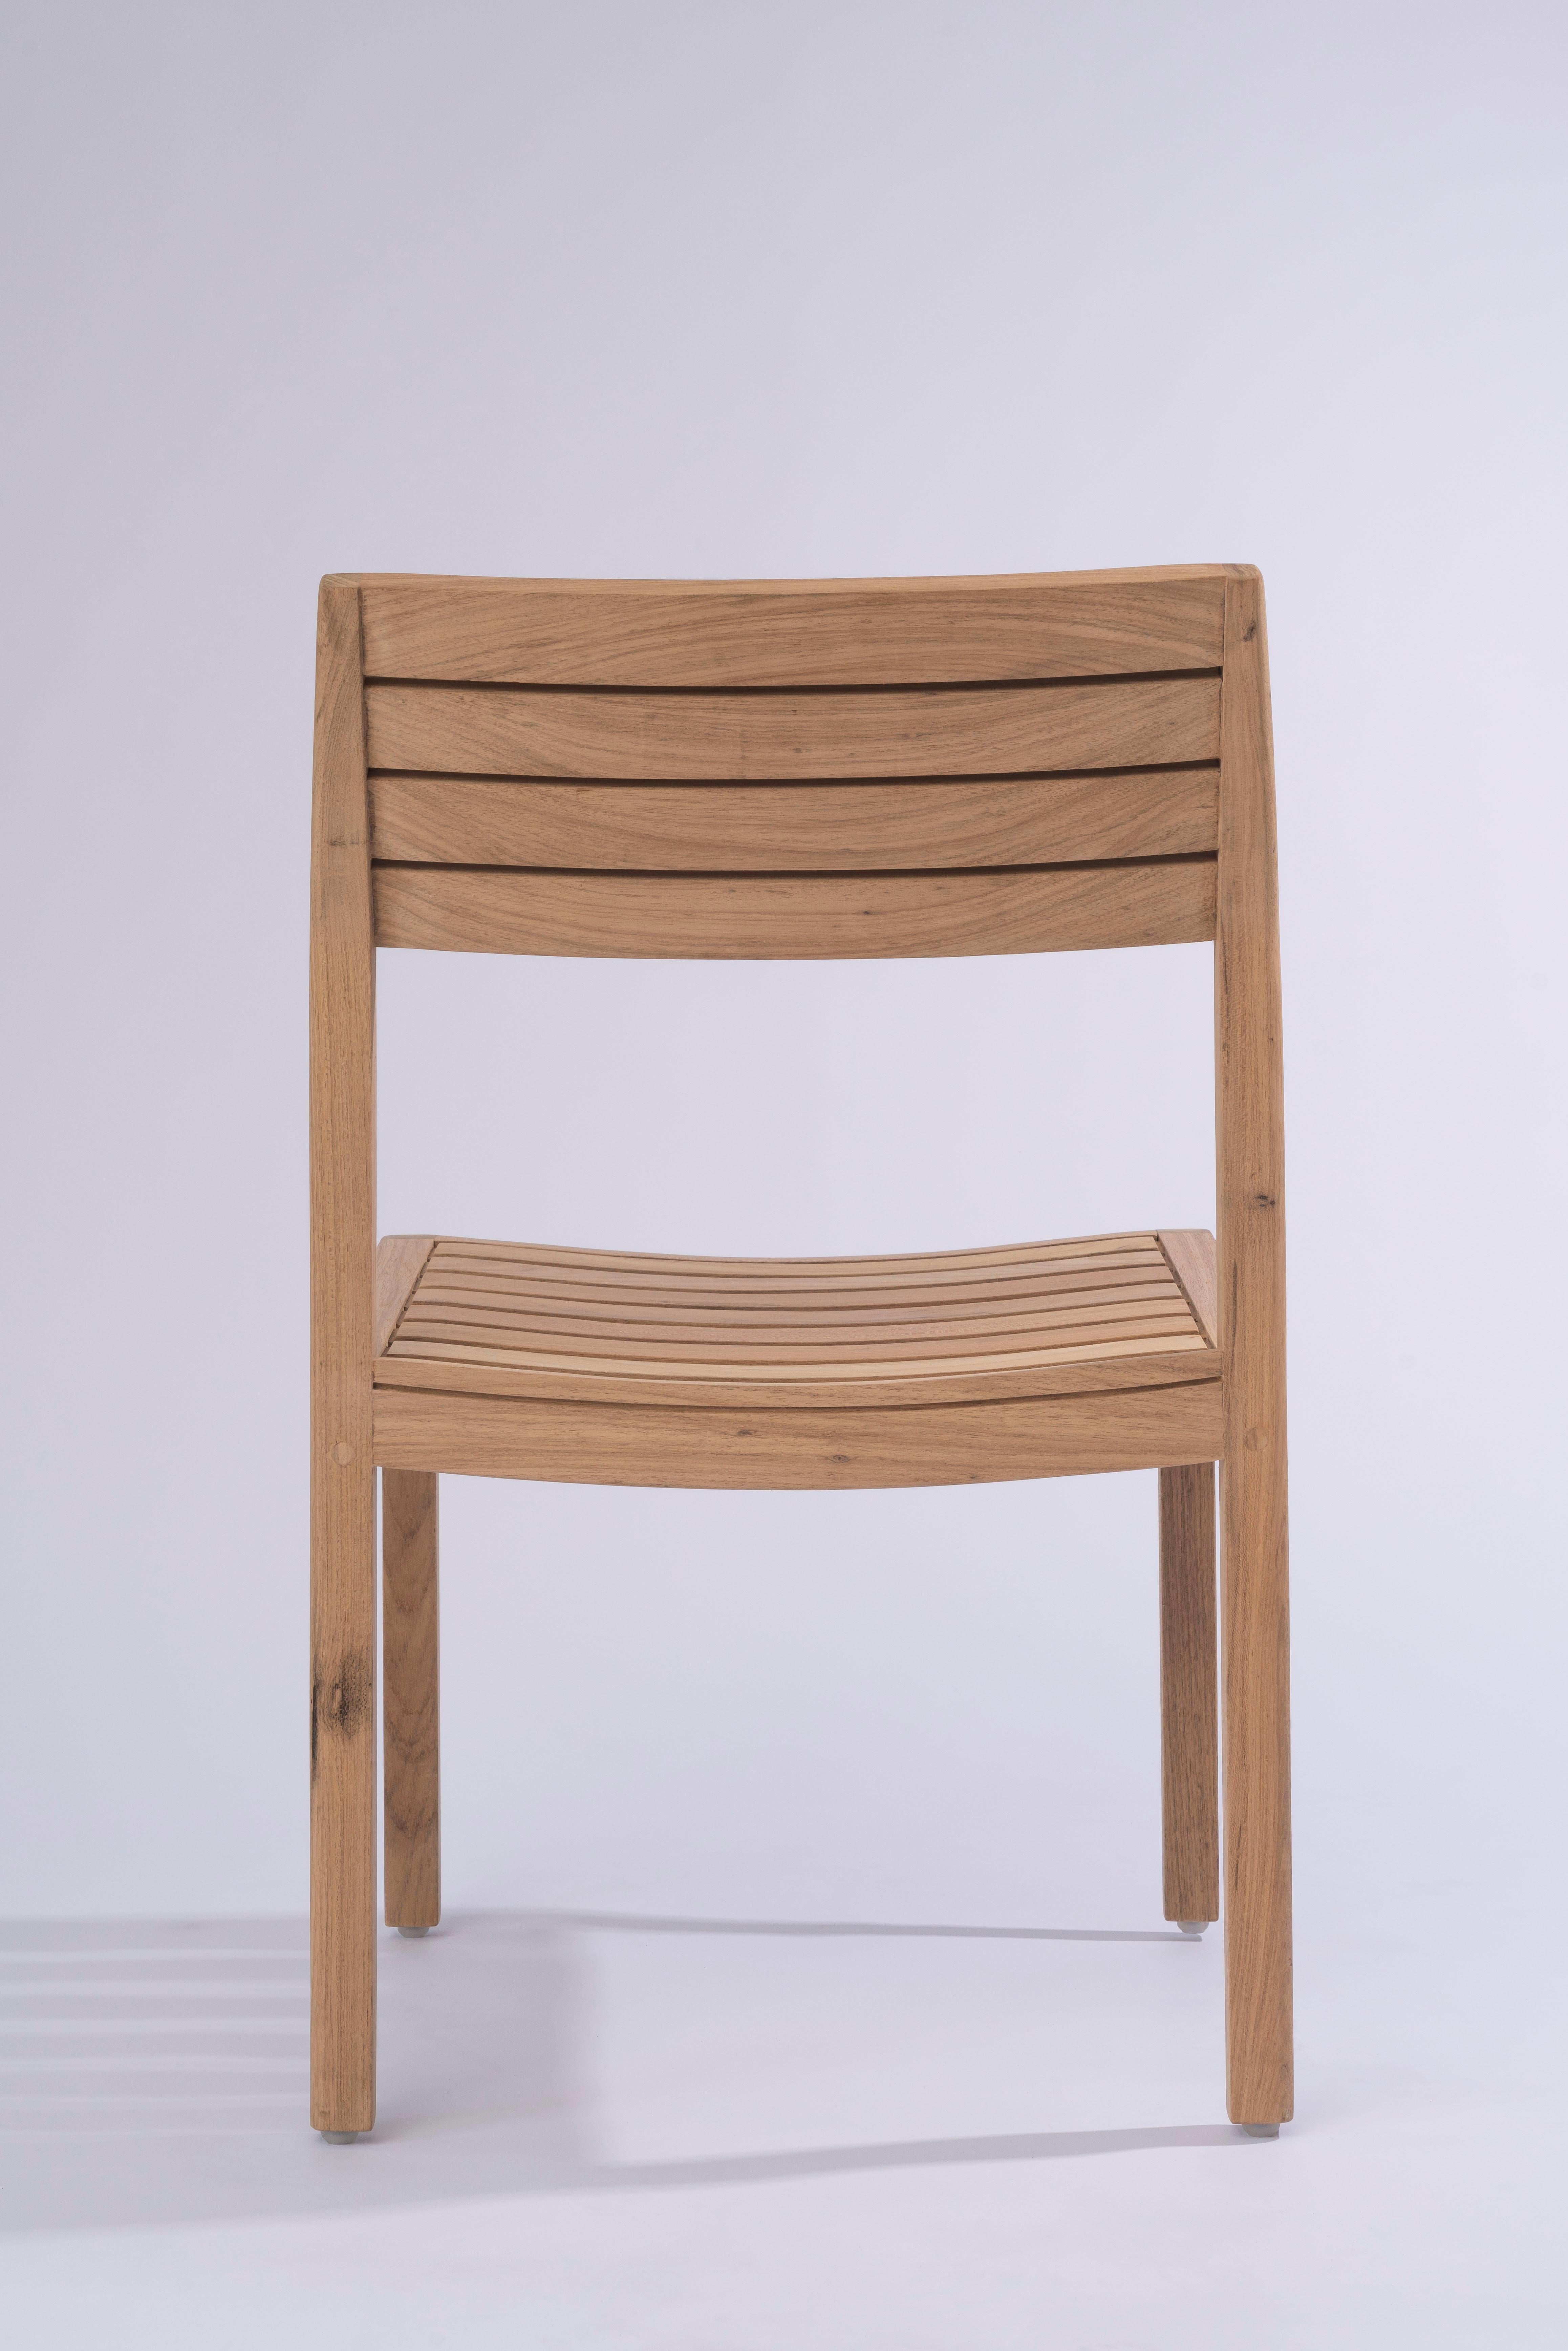 Solid Wood Arms Chair with Wooden Slats, for the Outside, Outdoor Resistant For Sale 4